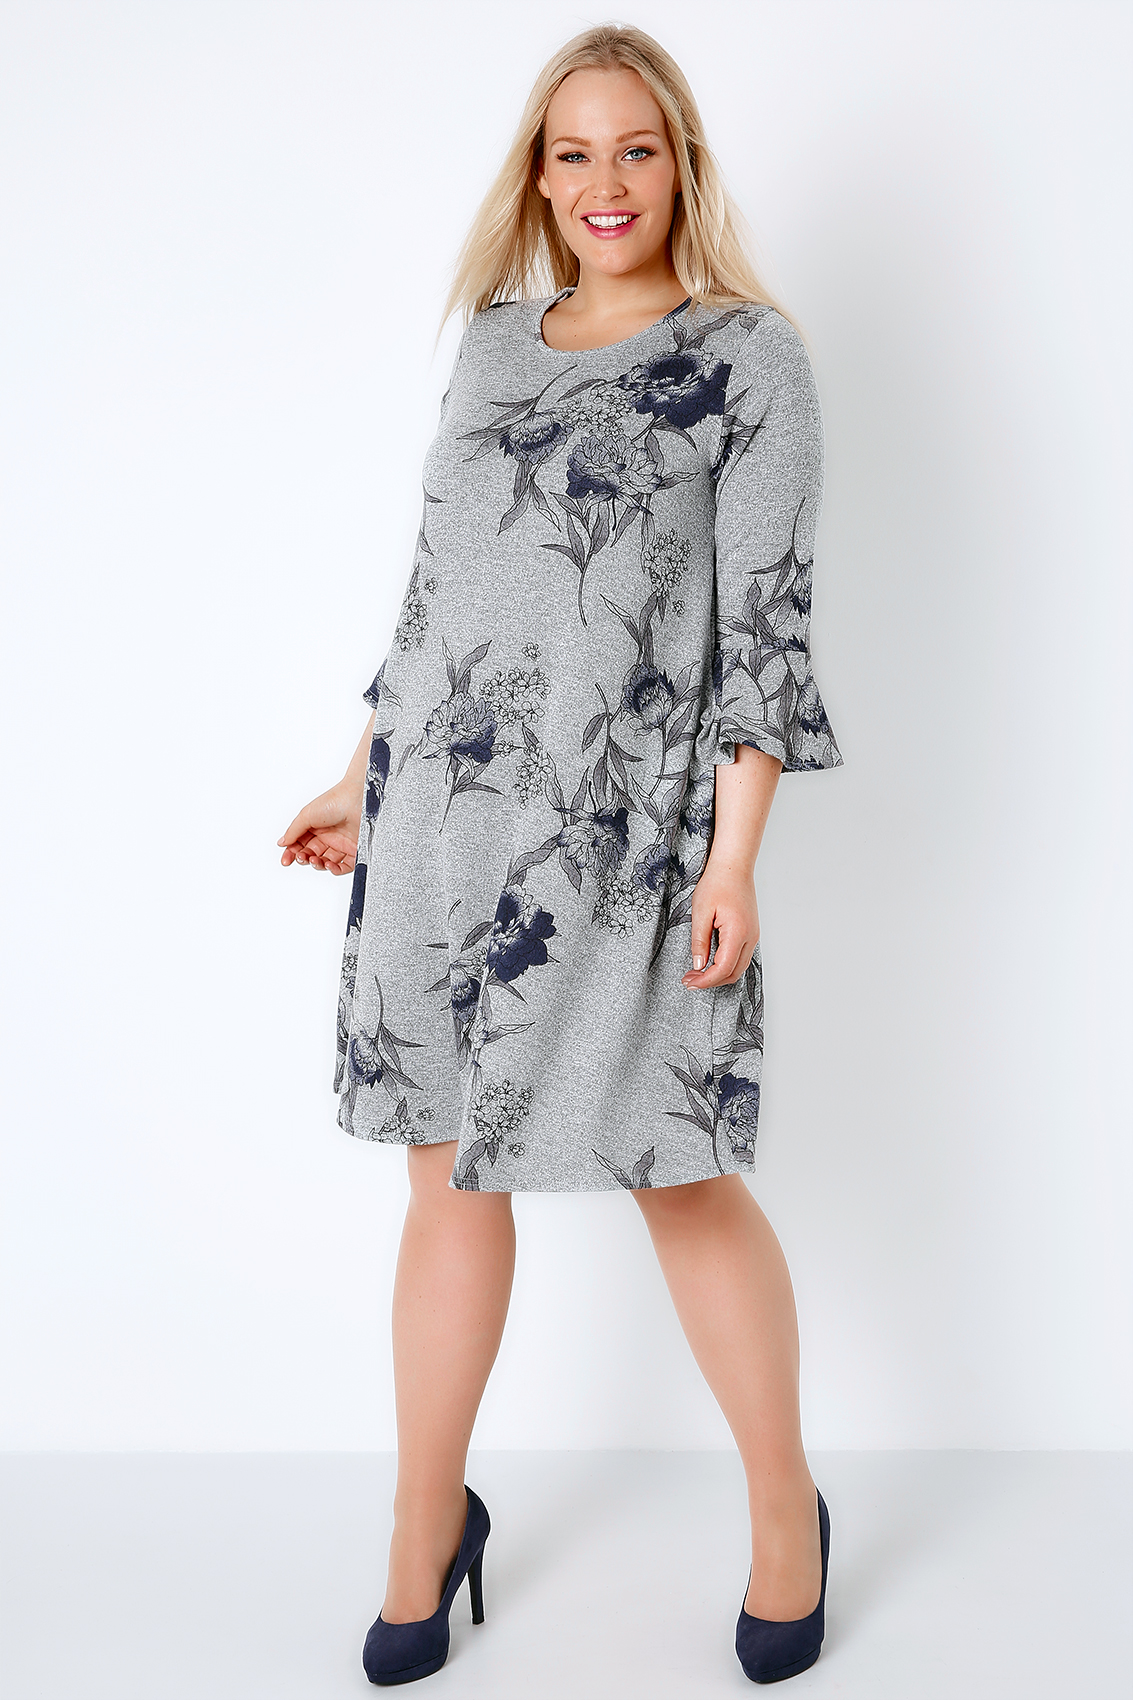 Grey Marl & Blue Floral Print Swing Dress With Flute Sleeves plus size ...